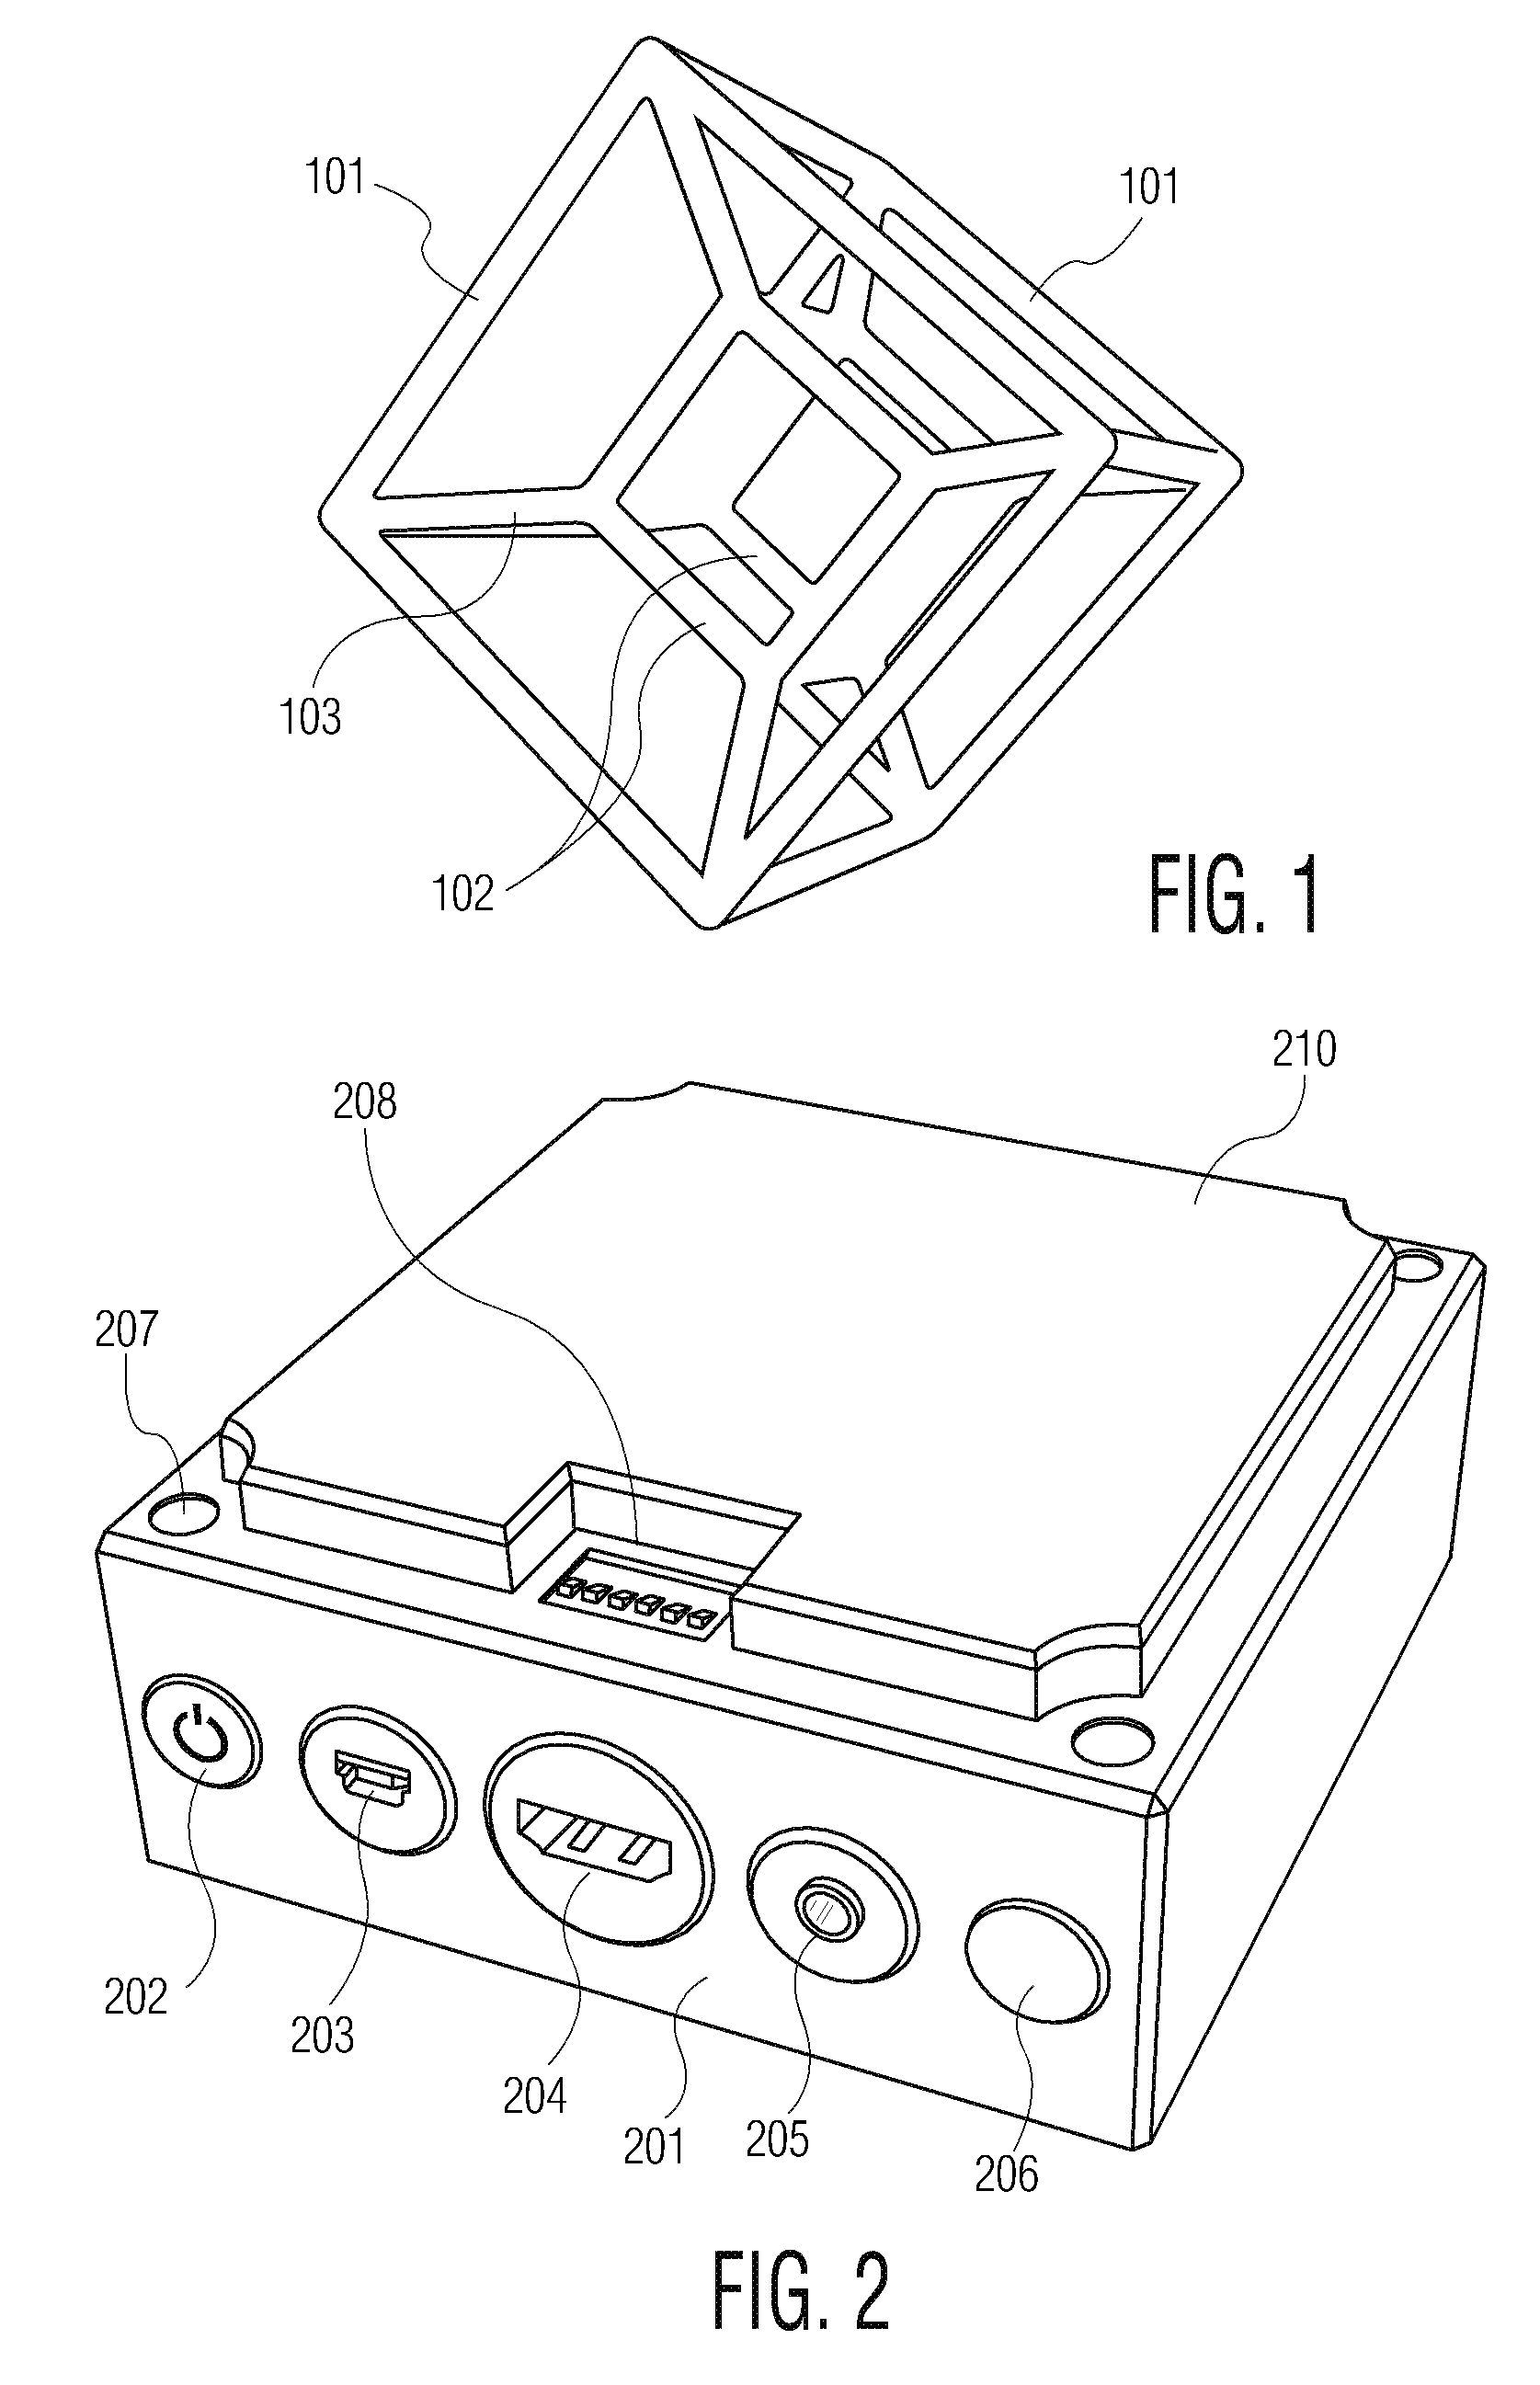 Modular quick-connect A/V system and methods thereof